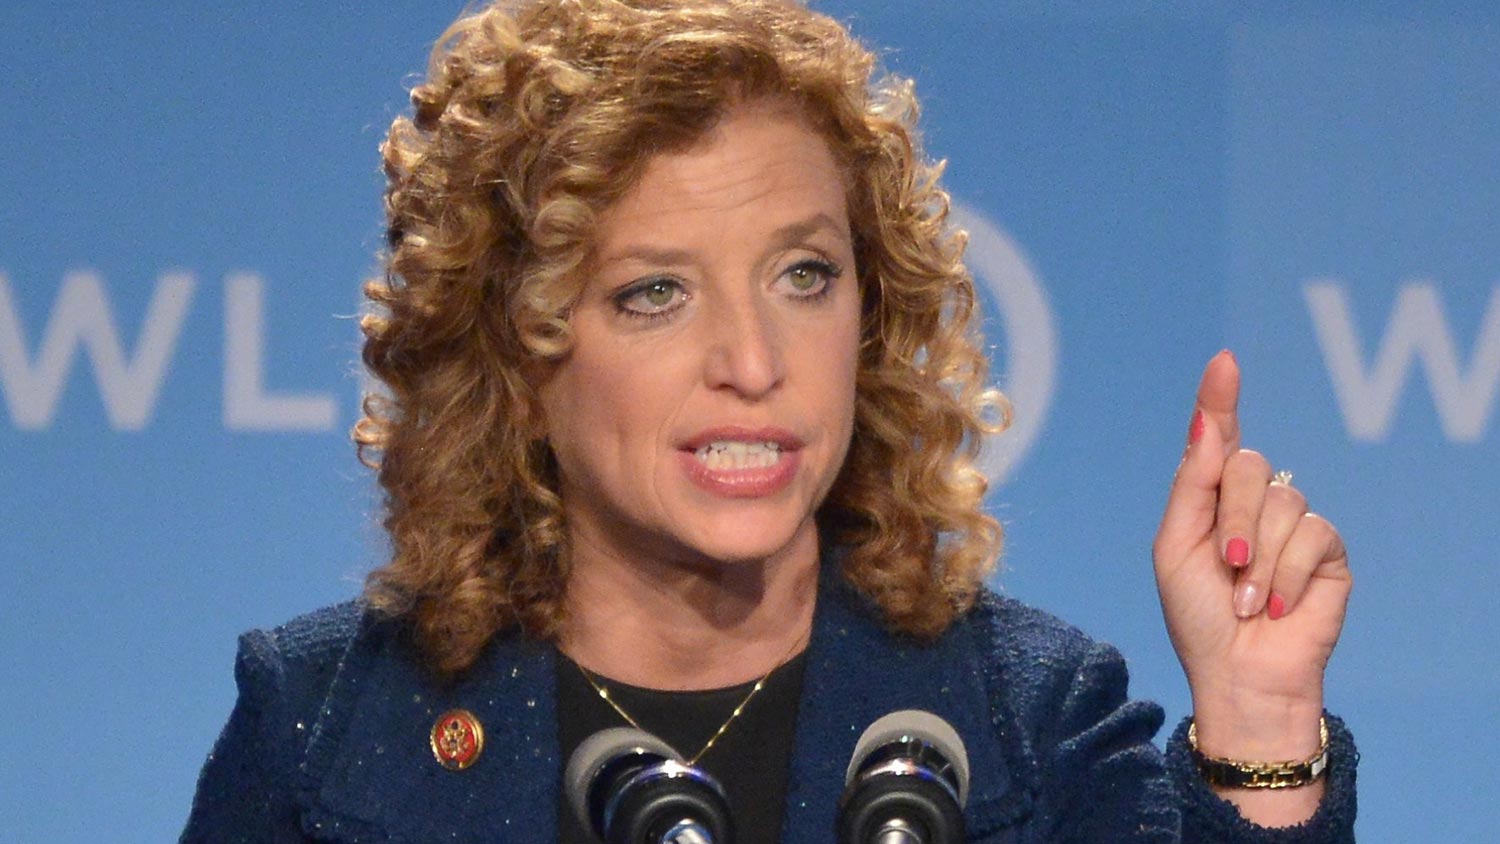 Democratic National Committee (DNC) Chair, Representative Debbie Wasserman Schultz, Democrat of Florida, speaks at the DNC's Leadership Forum Issues Conference in Washington, DC, on September 19, 2014.
